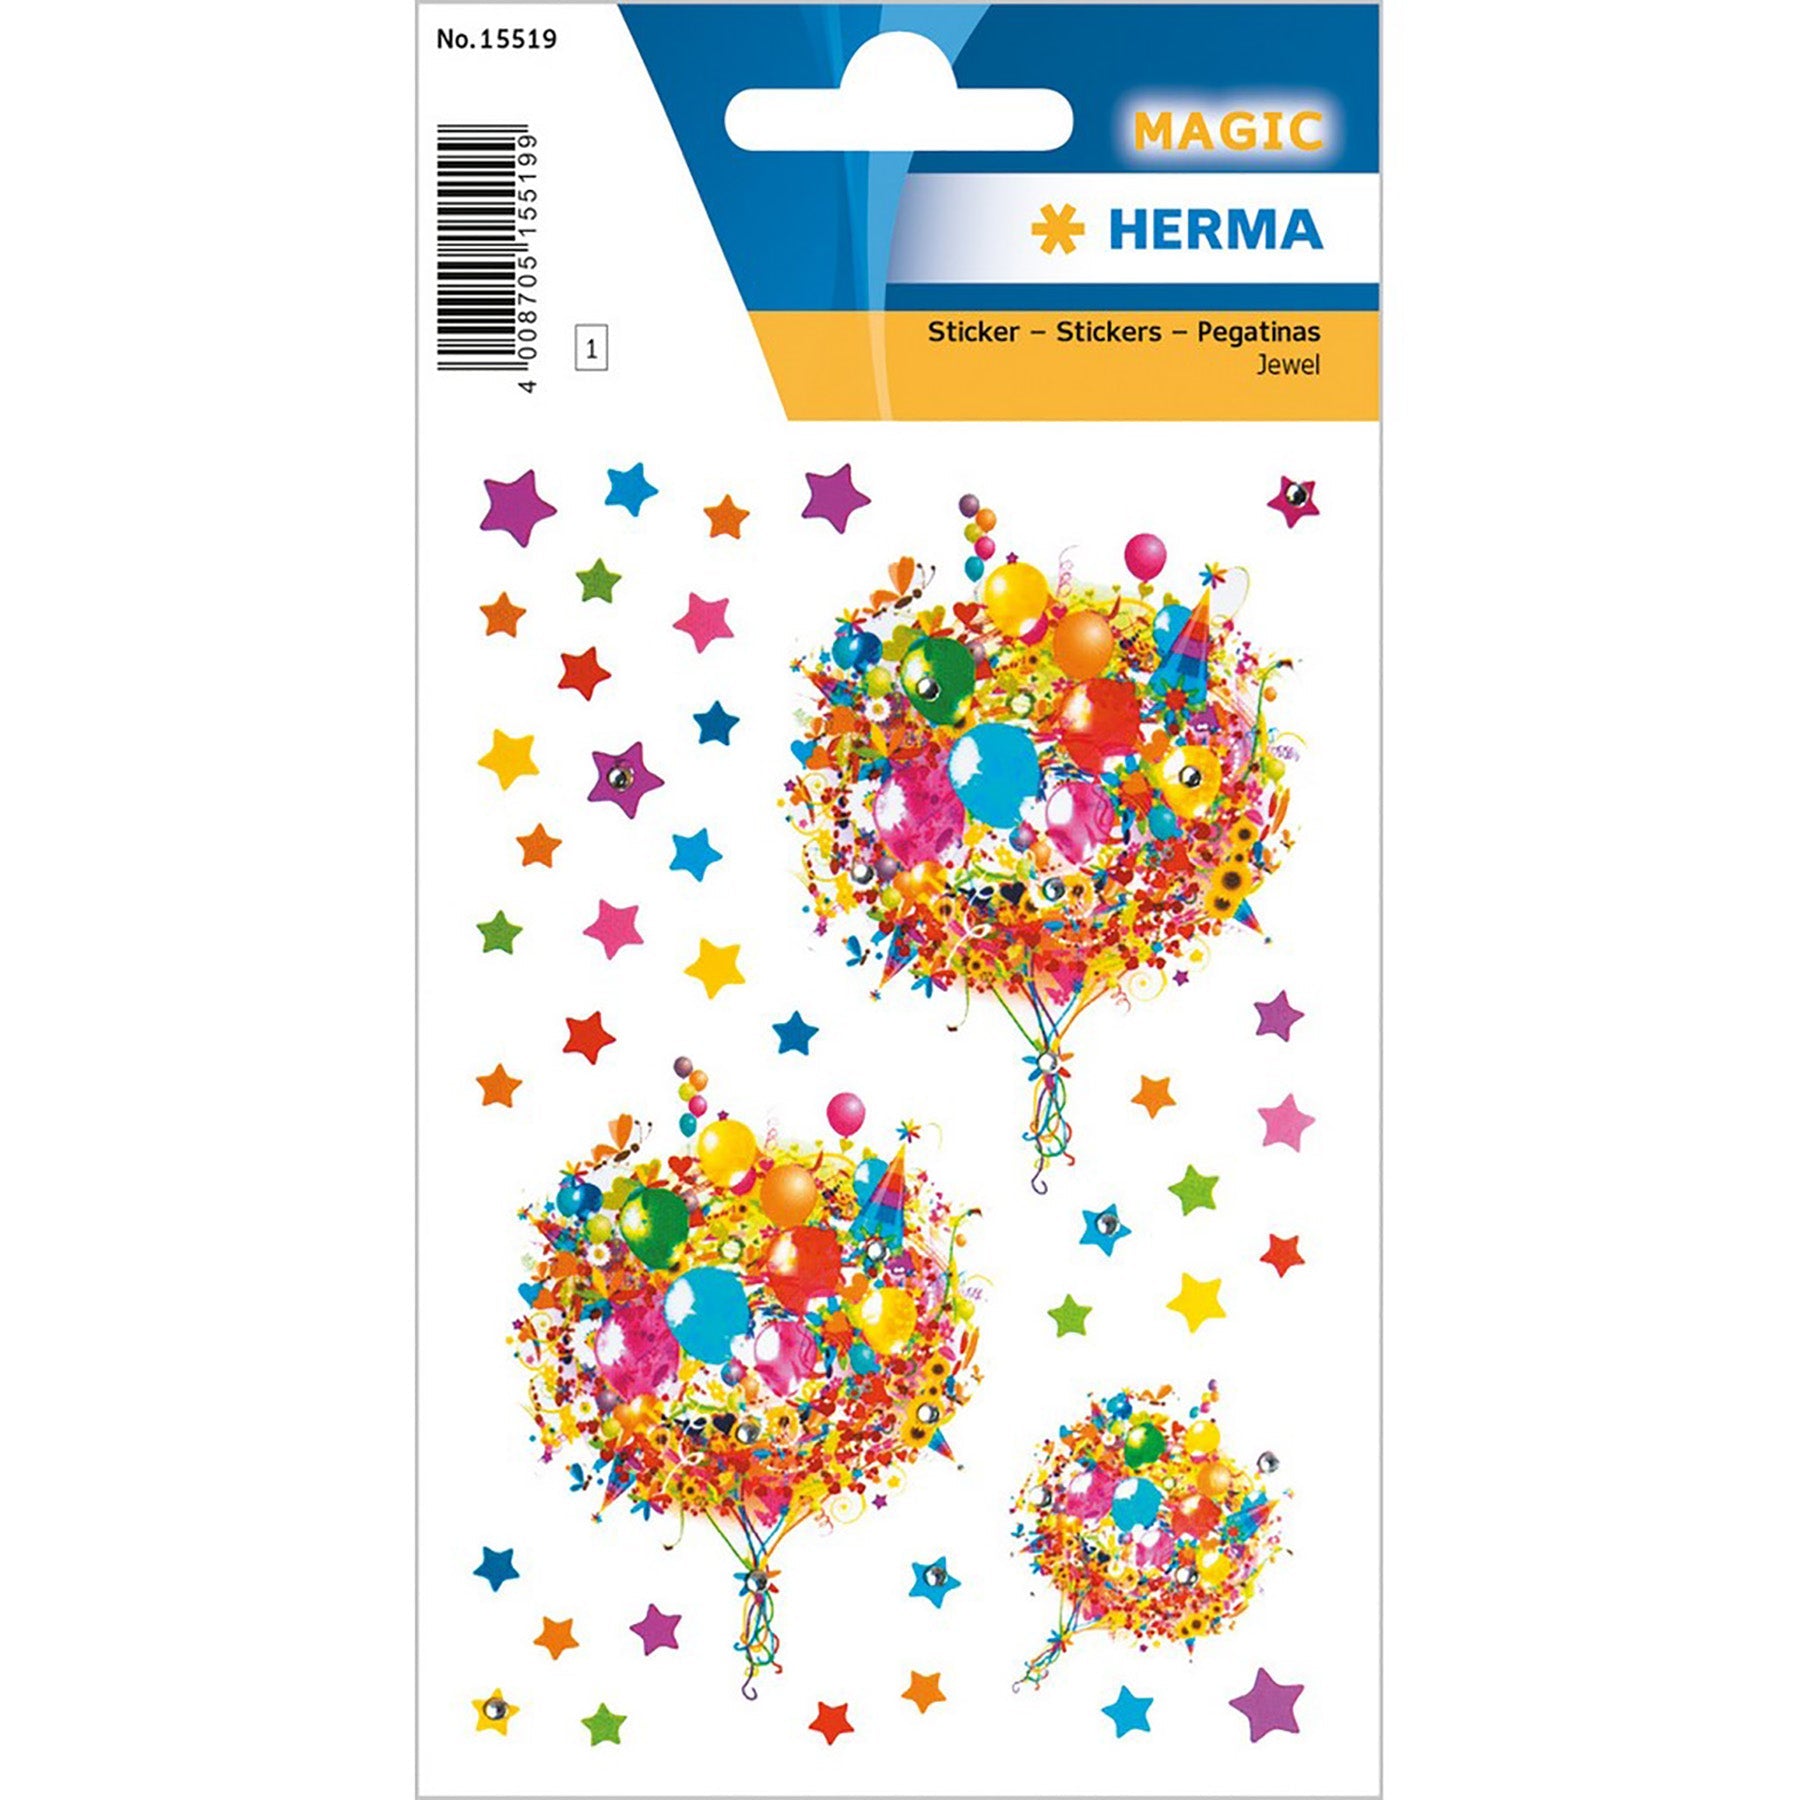 Herma Magic Stickers Flower Love with Jewel 4.75x3.1in Sheet